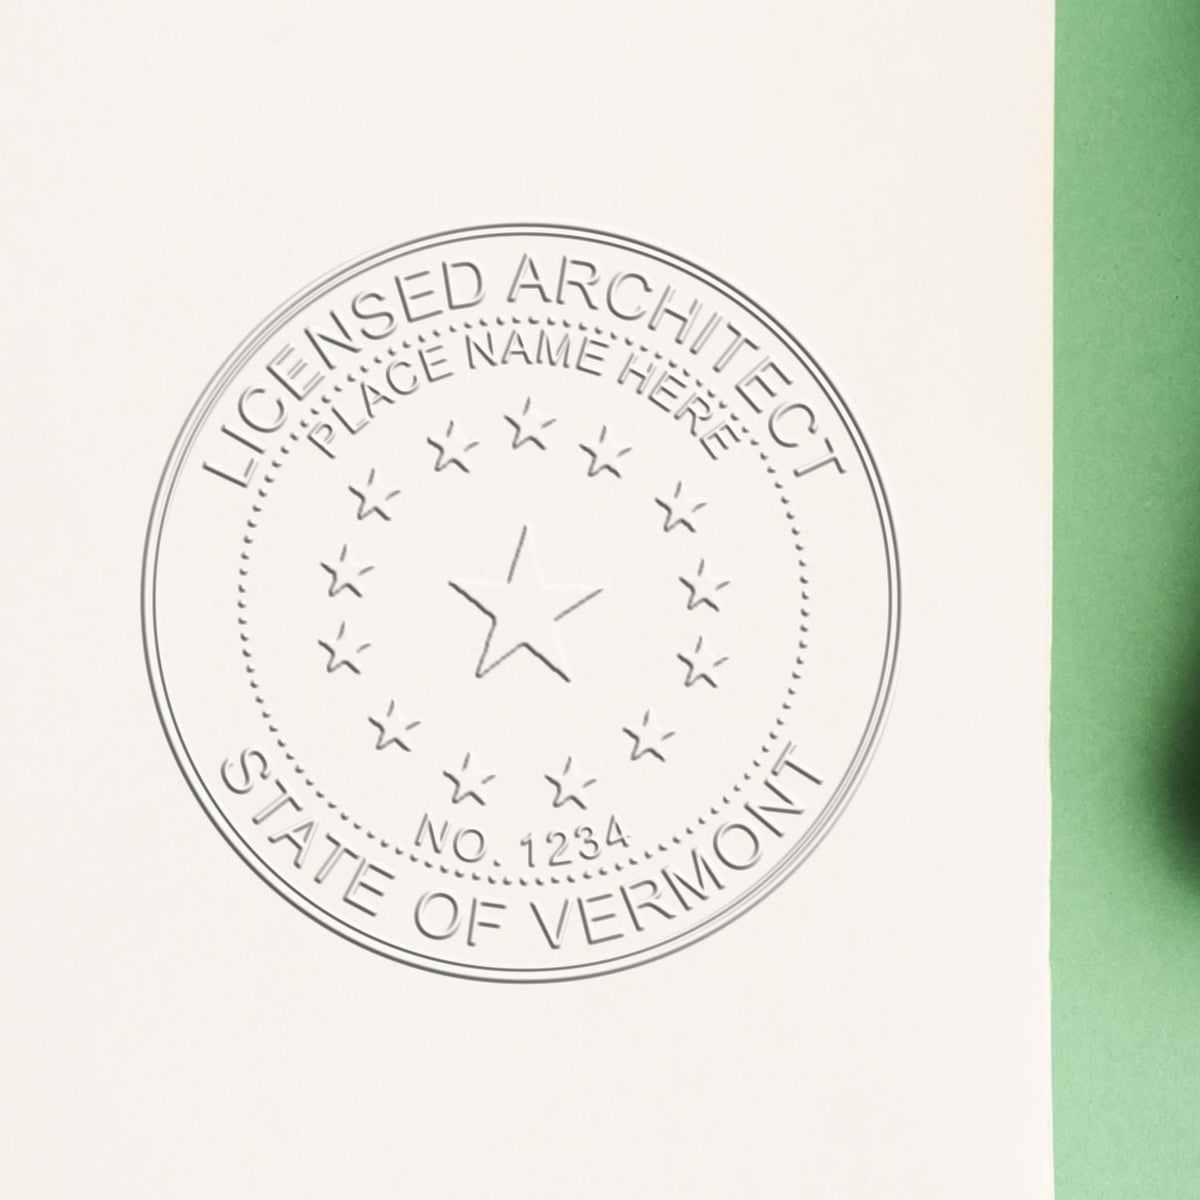 A stamped impression of the Vermont Desk Architect Embossing Seal in this stylish lifestyle photo, setting the tone for a unique and personalized product.